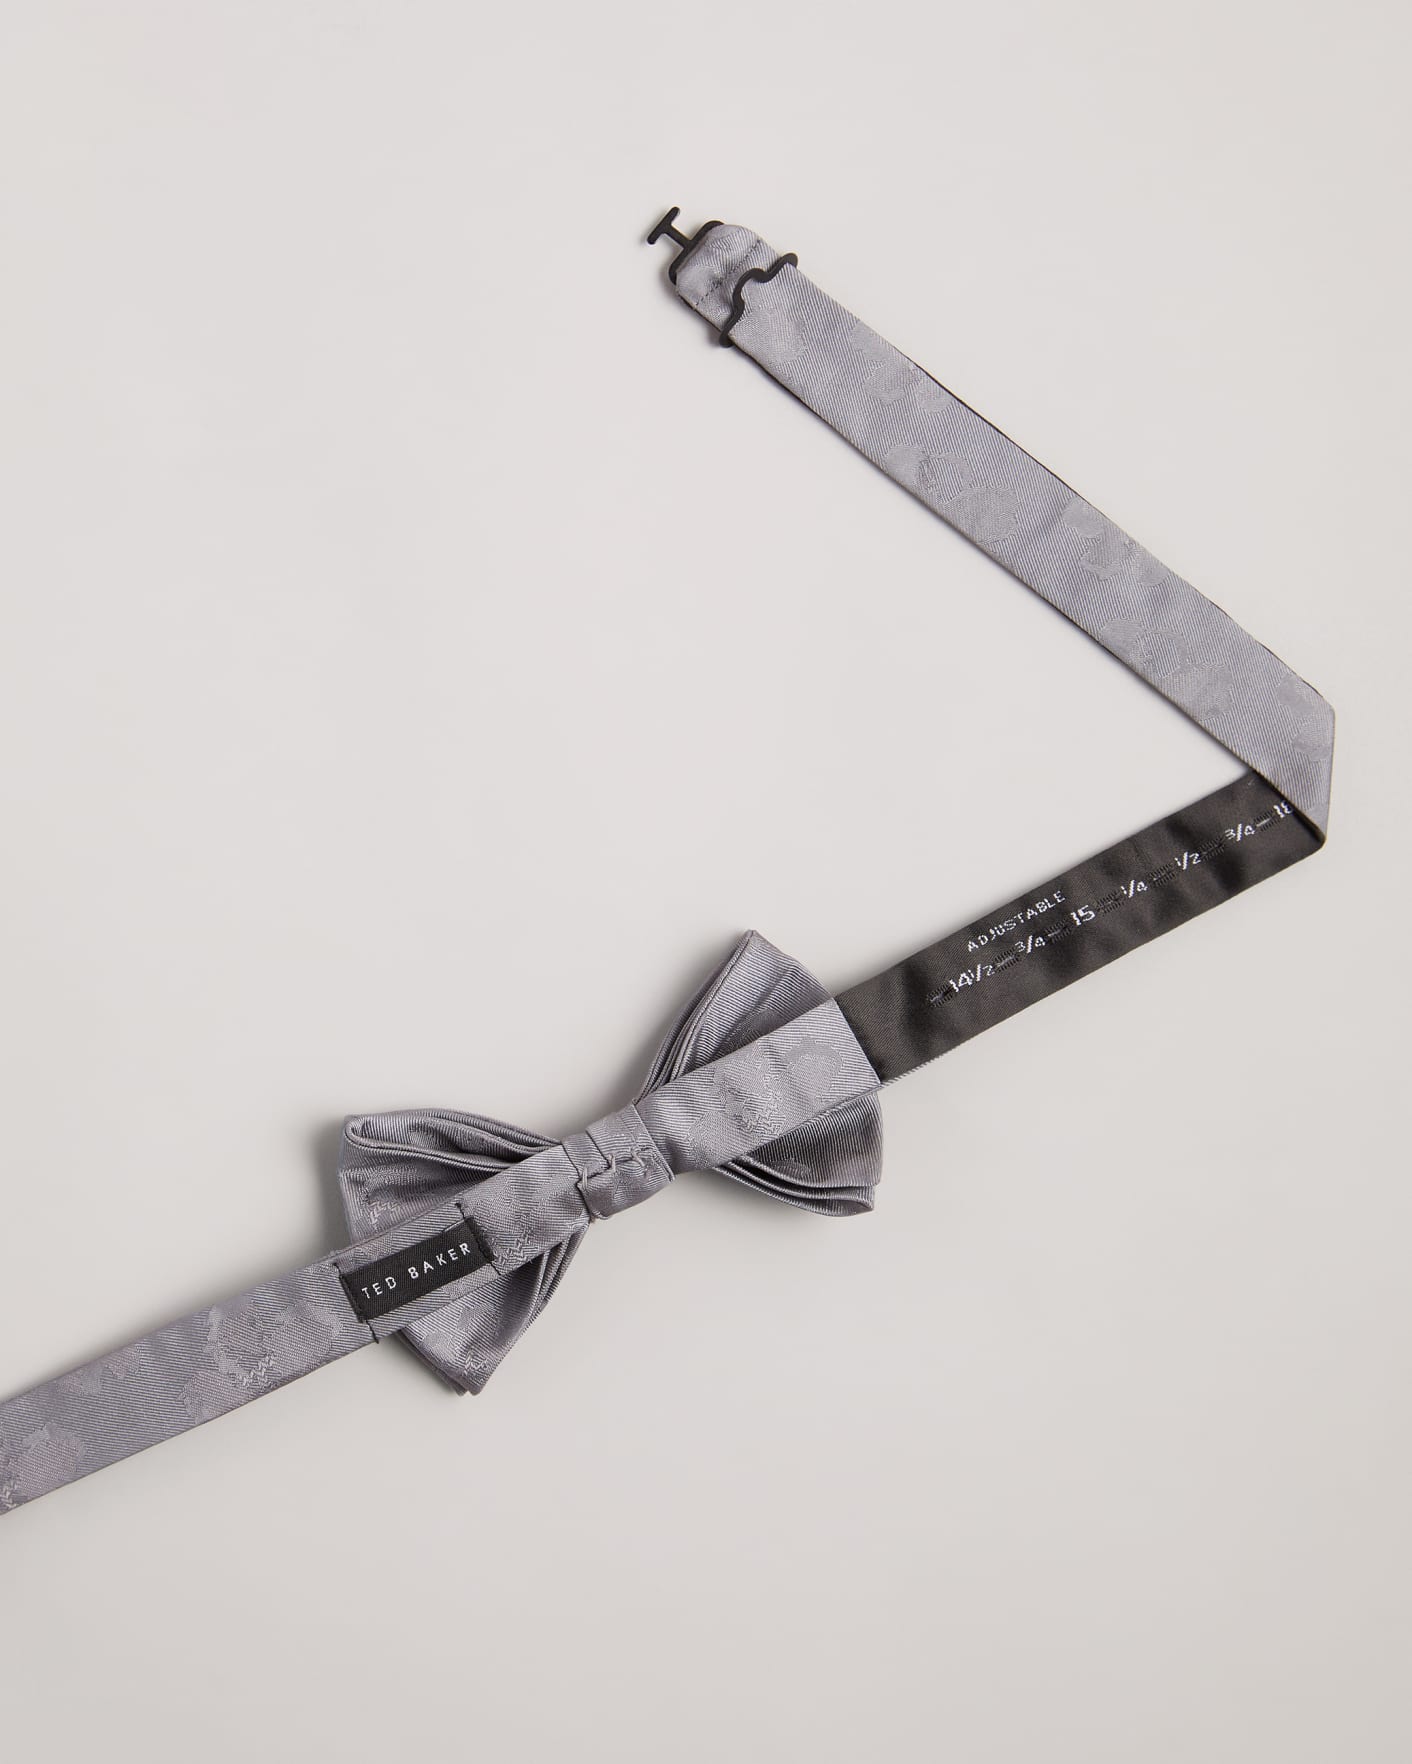 Silver Magnolia Jacquard Bowtie Ted Baker